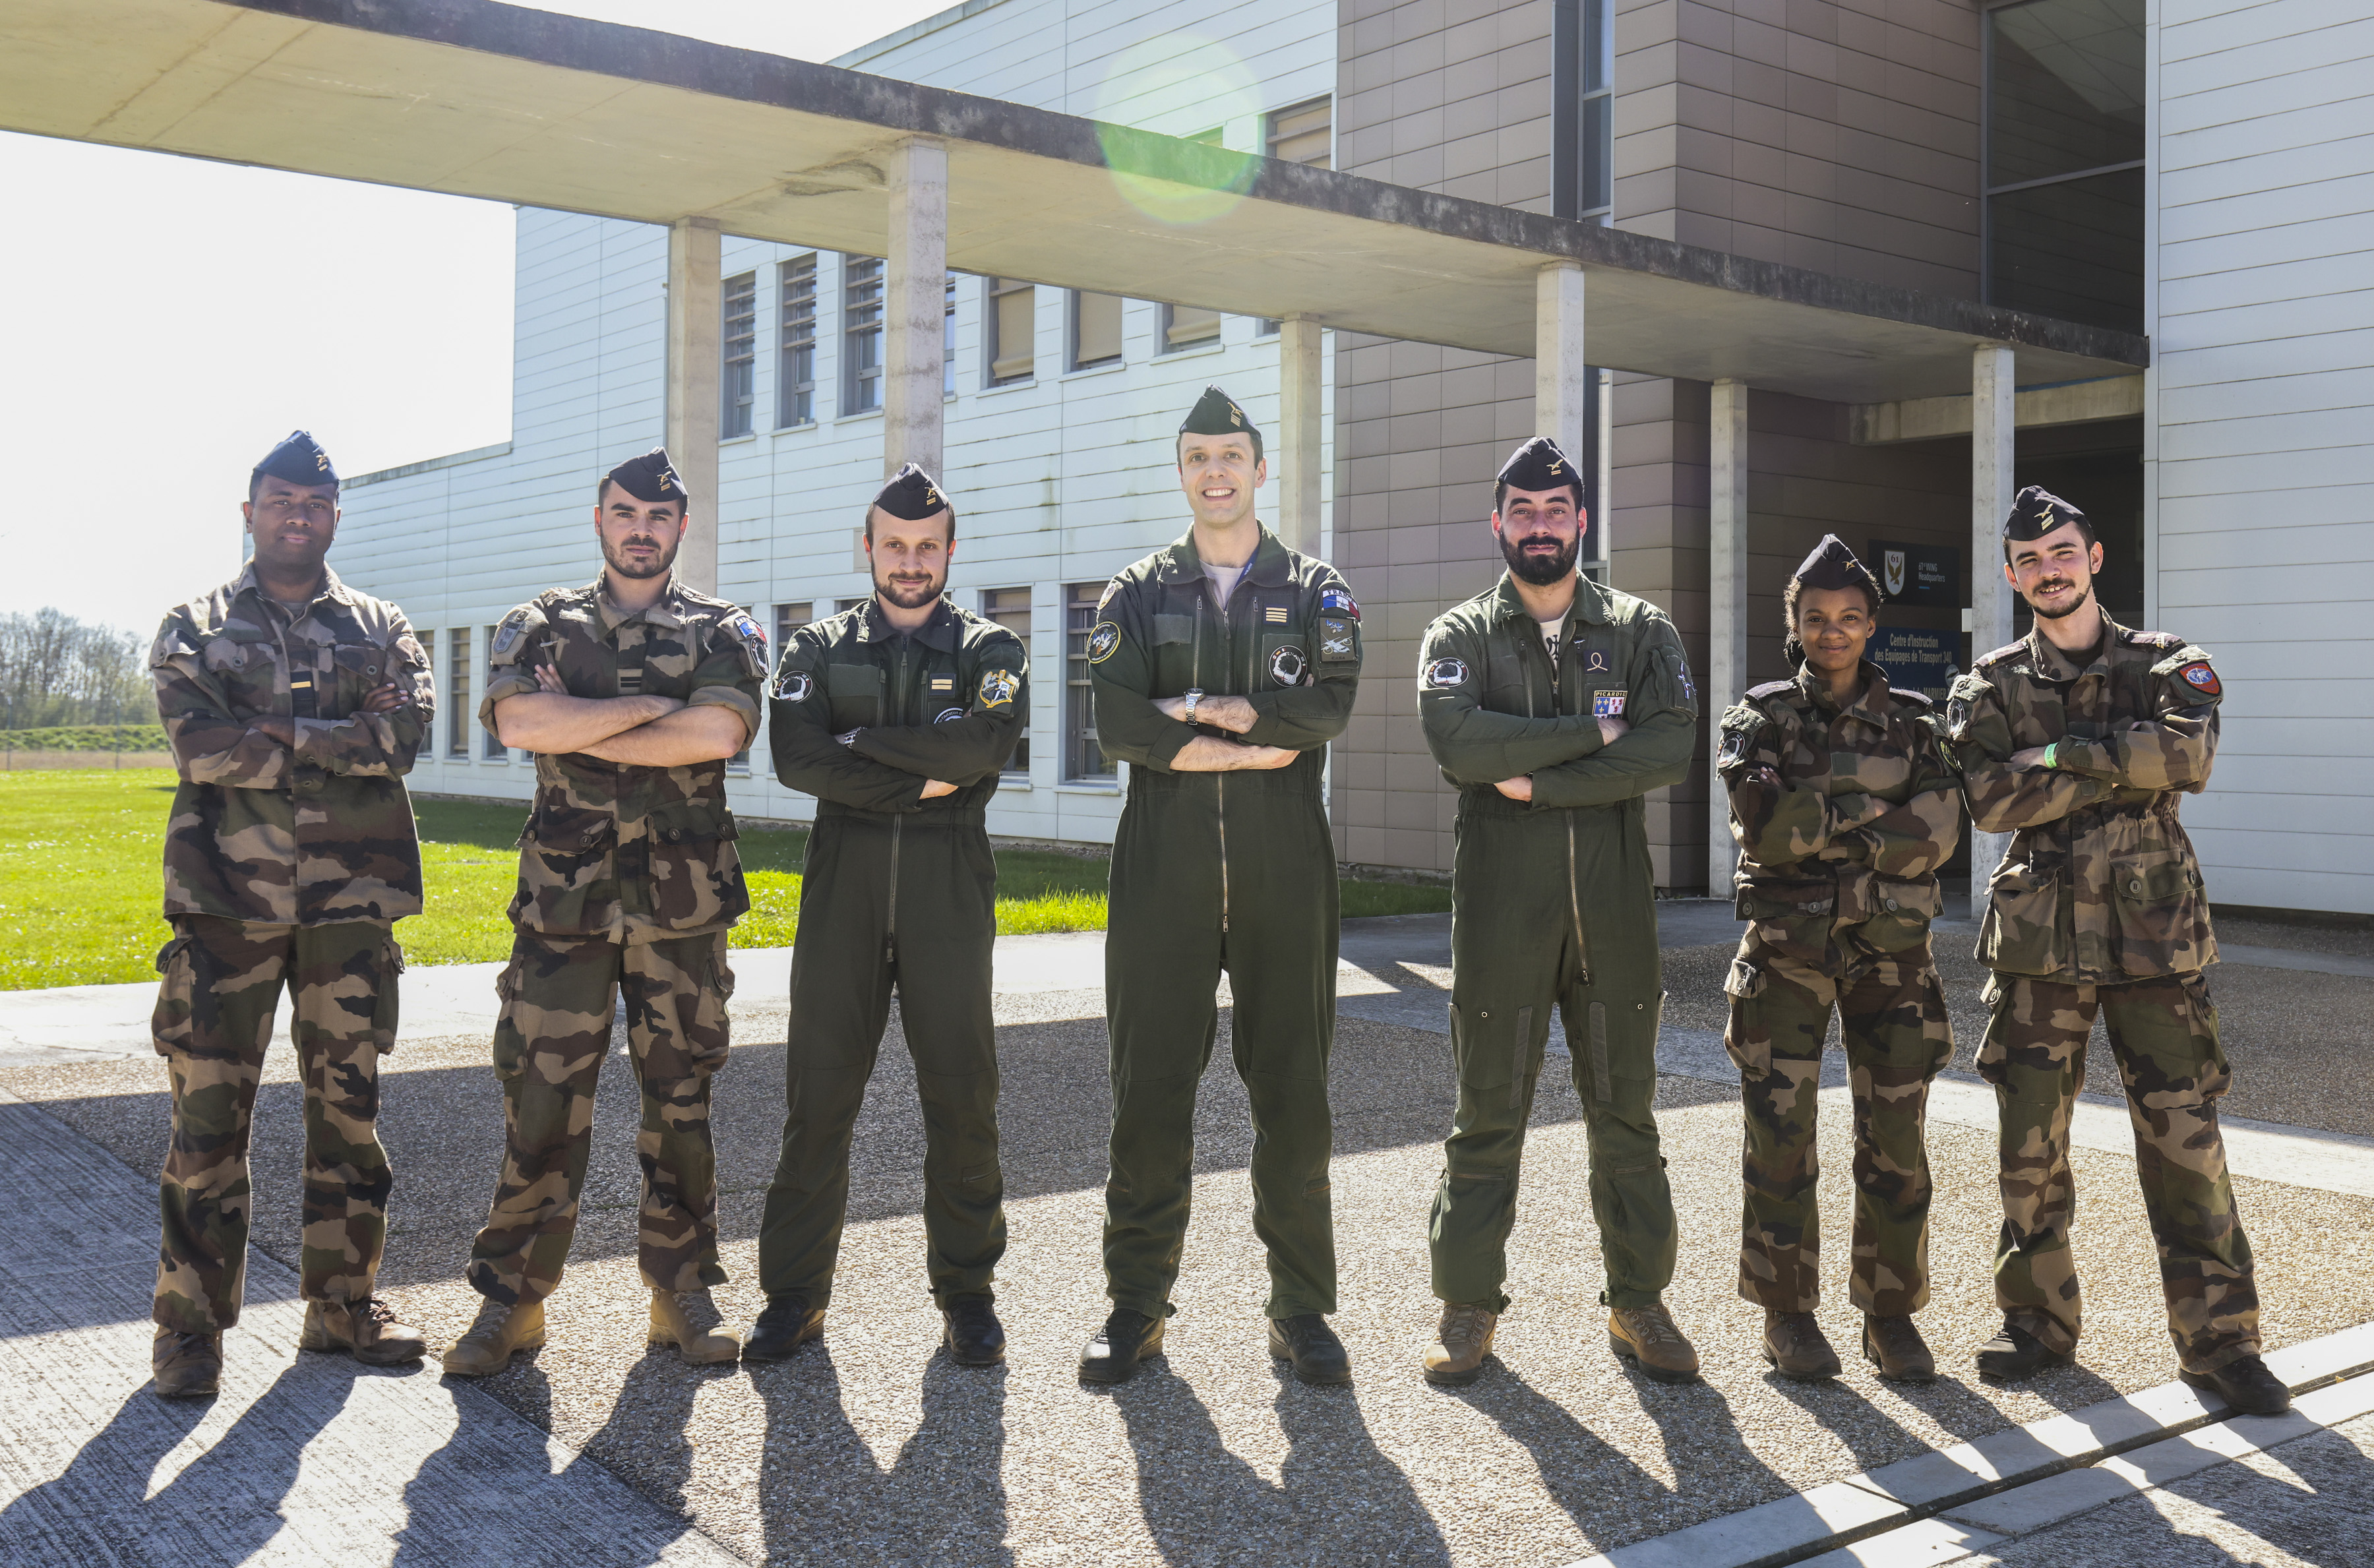 Personnel from the different Air Forces standing smiling at the camera with their arms crossed